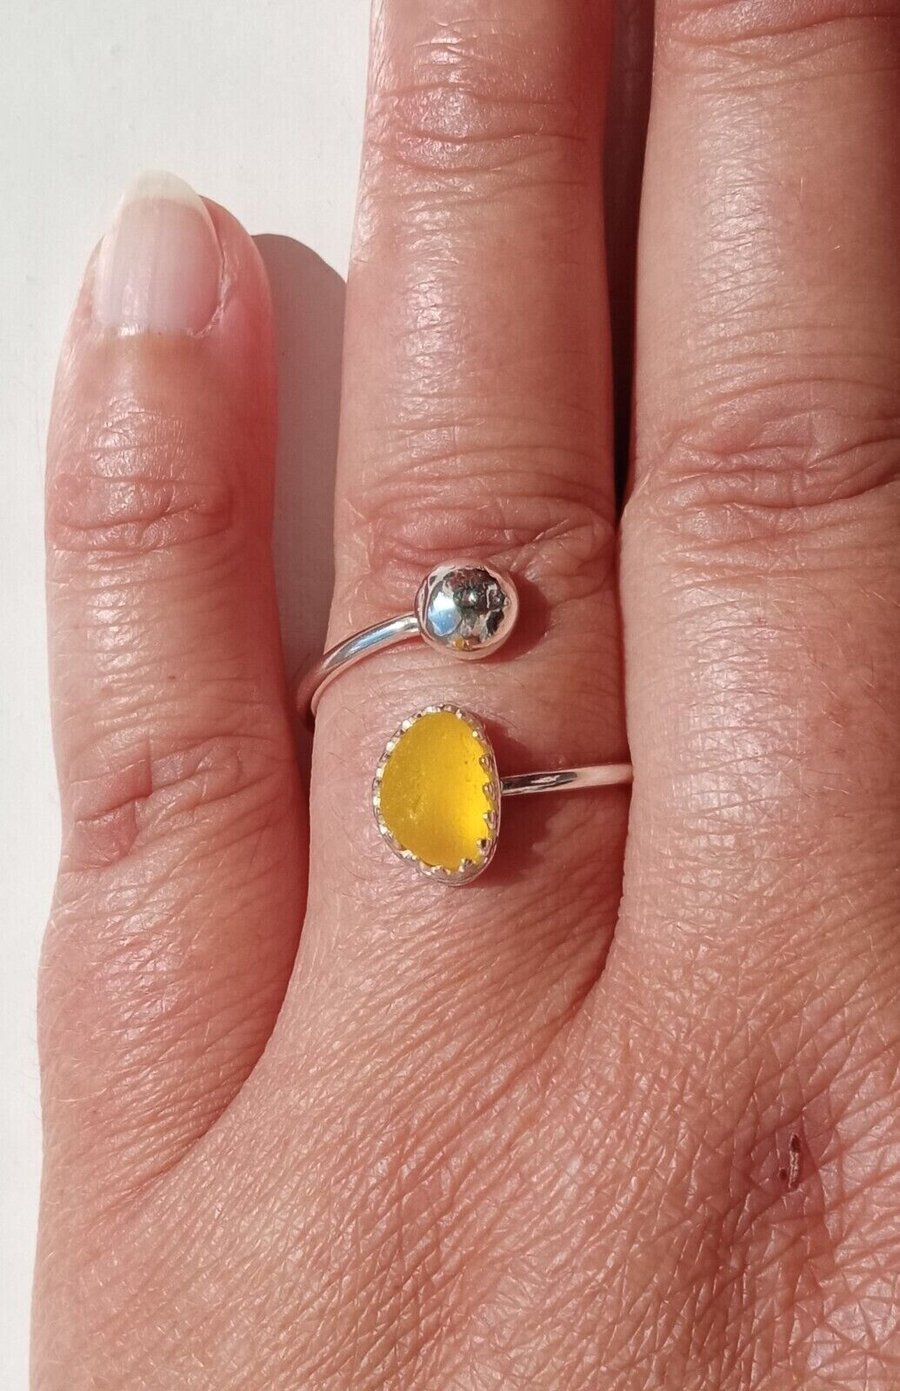 Recycled Sterling Silver & Rare Bright Yellow Seaglass Adjustable Ring in Box